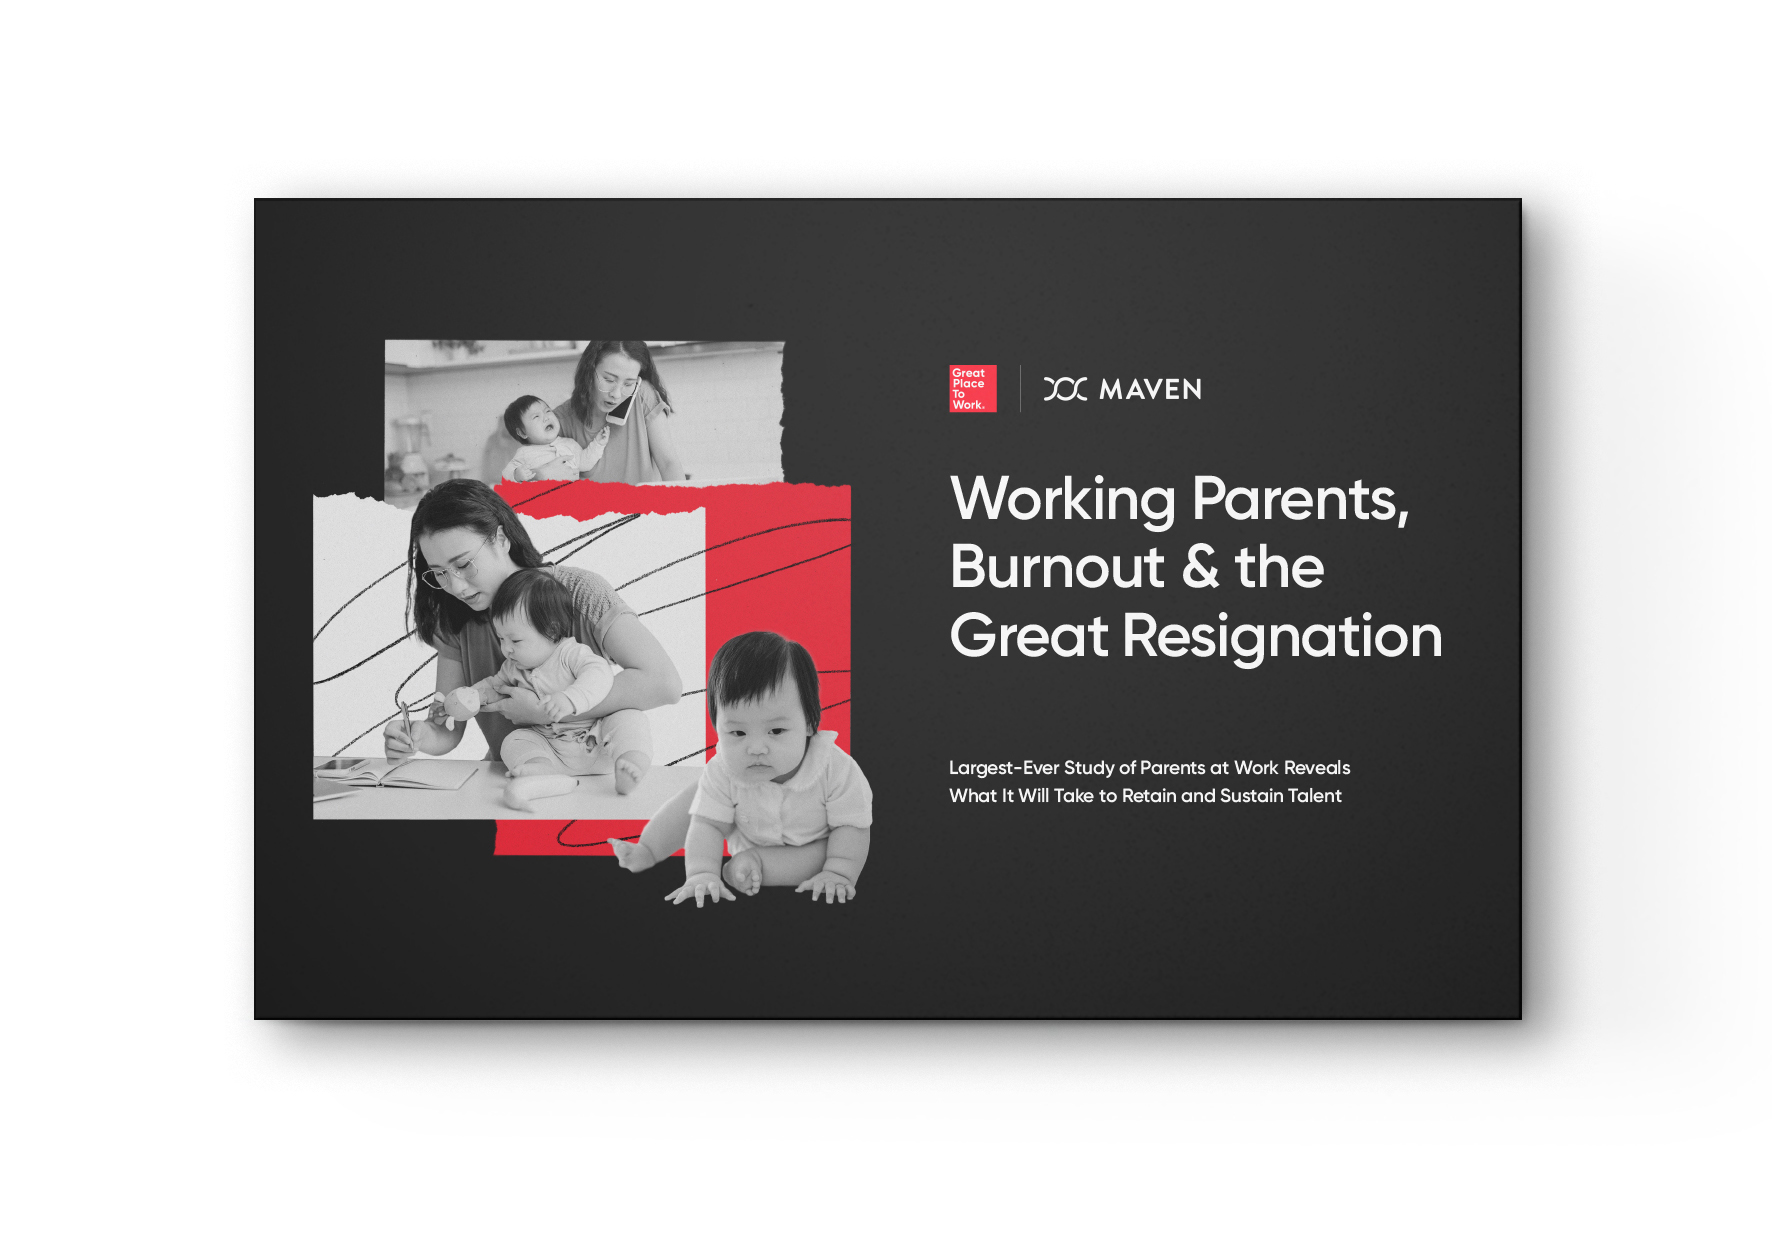  As Great Resignation Escalates, Maven Clinic and Great Place To Work® Release Study on What Parents Want in the New World of Work